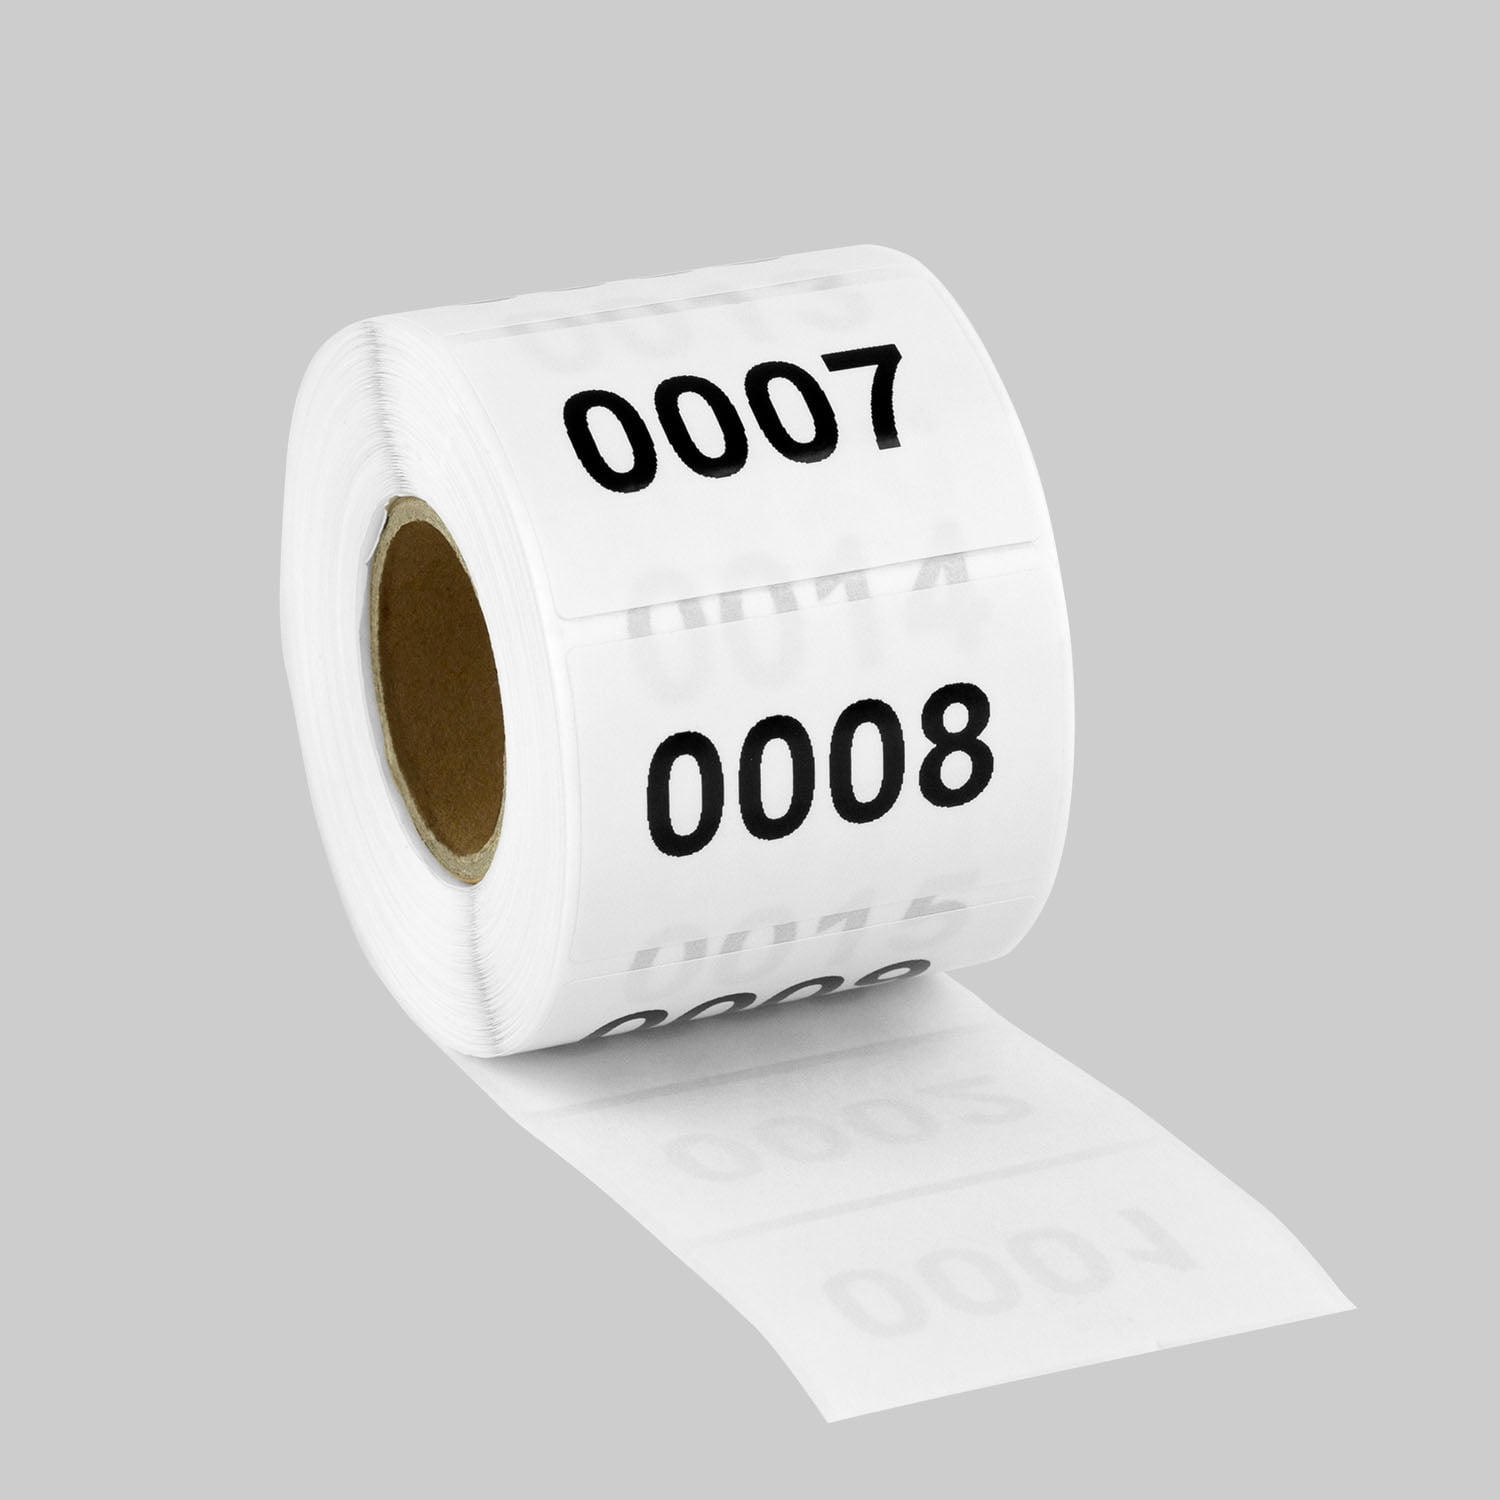 1" x 1" 1 Roll Made in USA Pre-Printed Labels Stickers ; 1000 Labels per Roll 